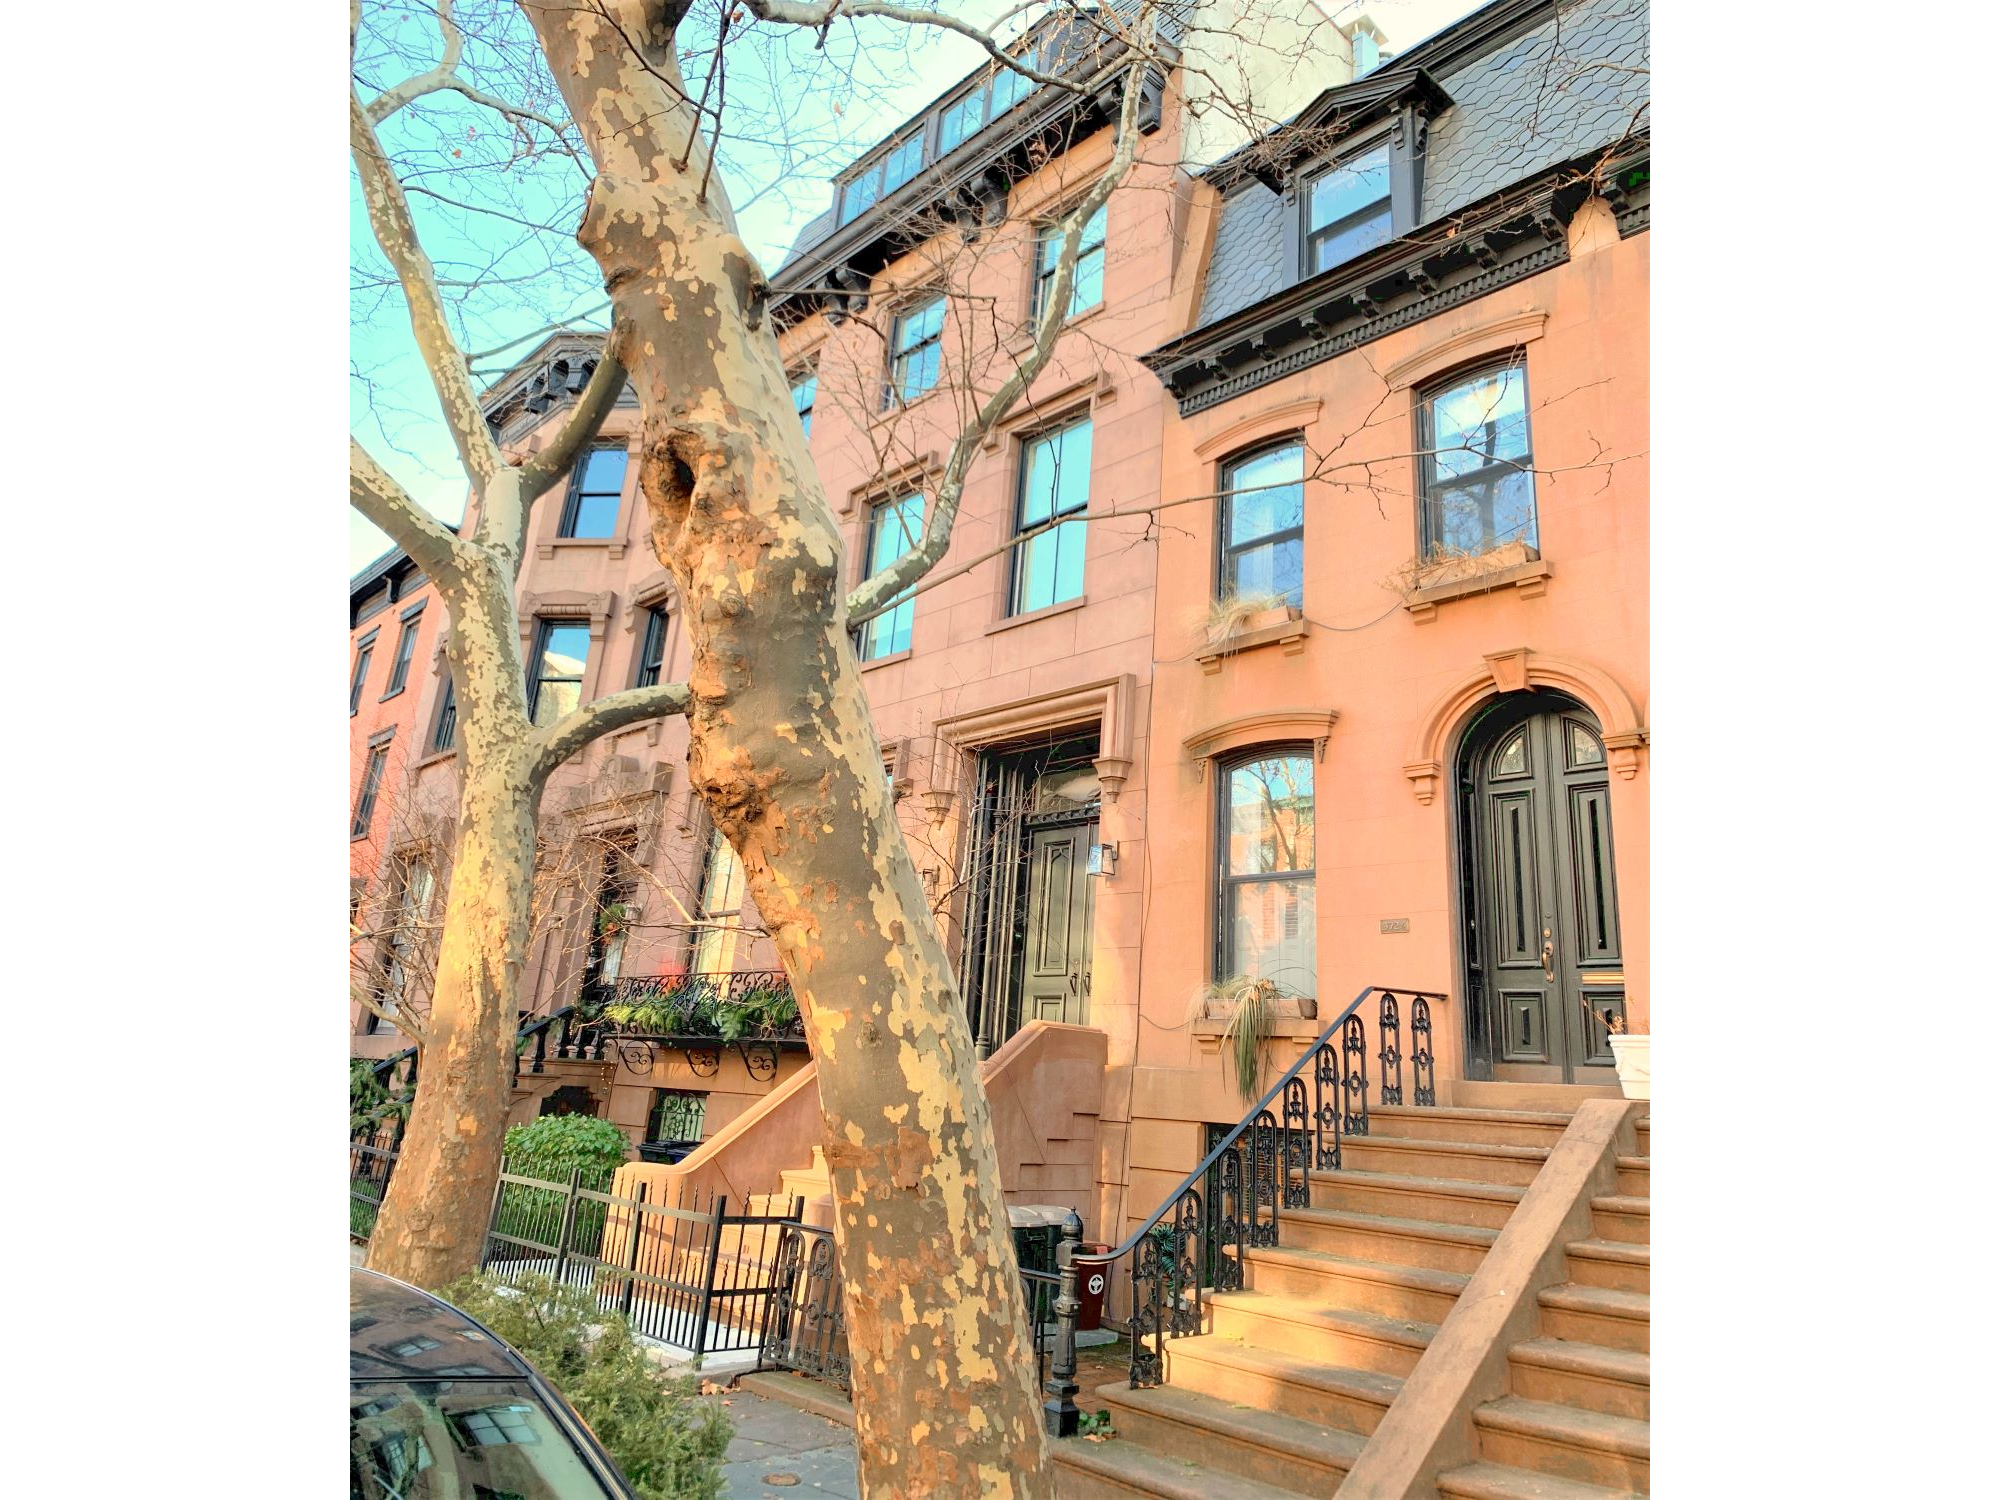 372 1/2 Pacific st, Brooklyn, NY, 3 Bedrooms Bedrooms, 10 Rooms Rooms,2 BathroomsBathrooms,Apartment,For Rent,Pacific st,1248